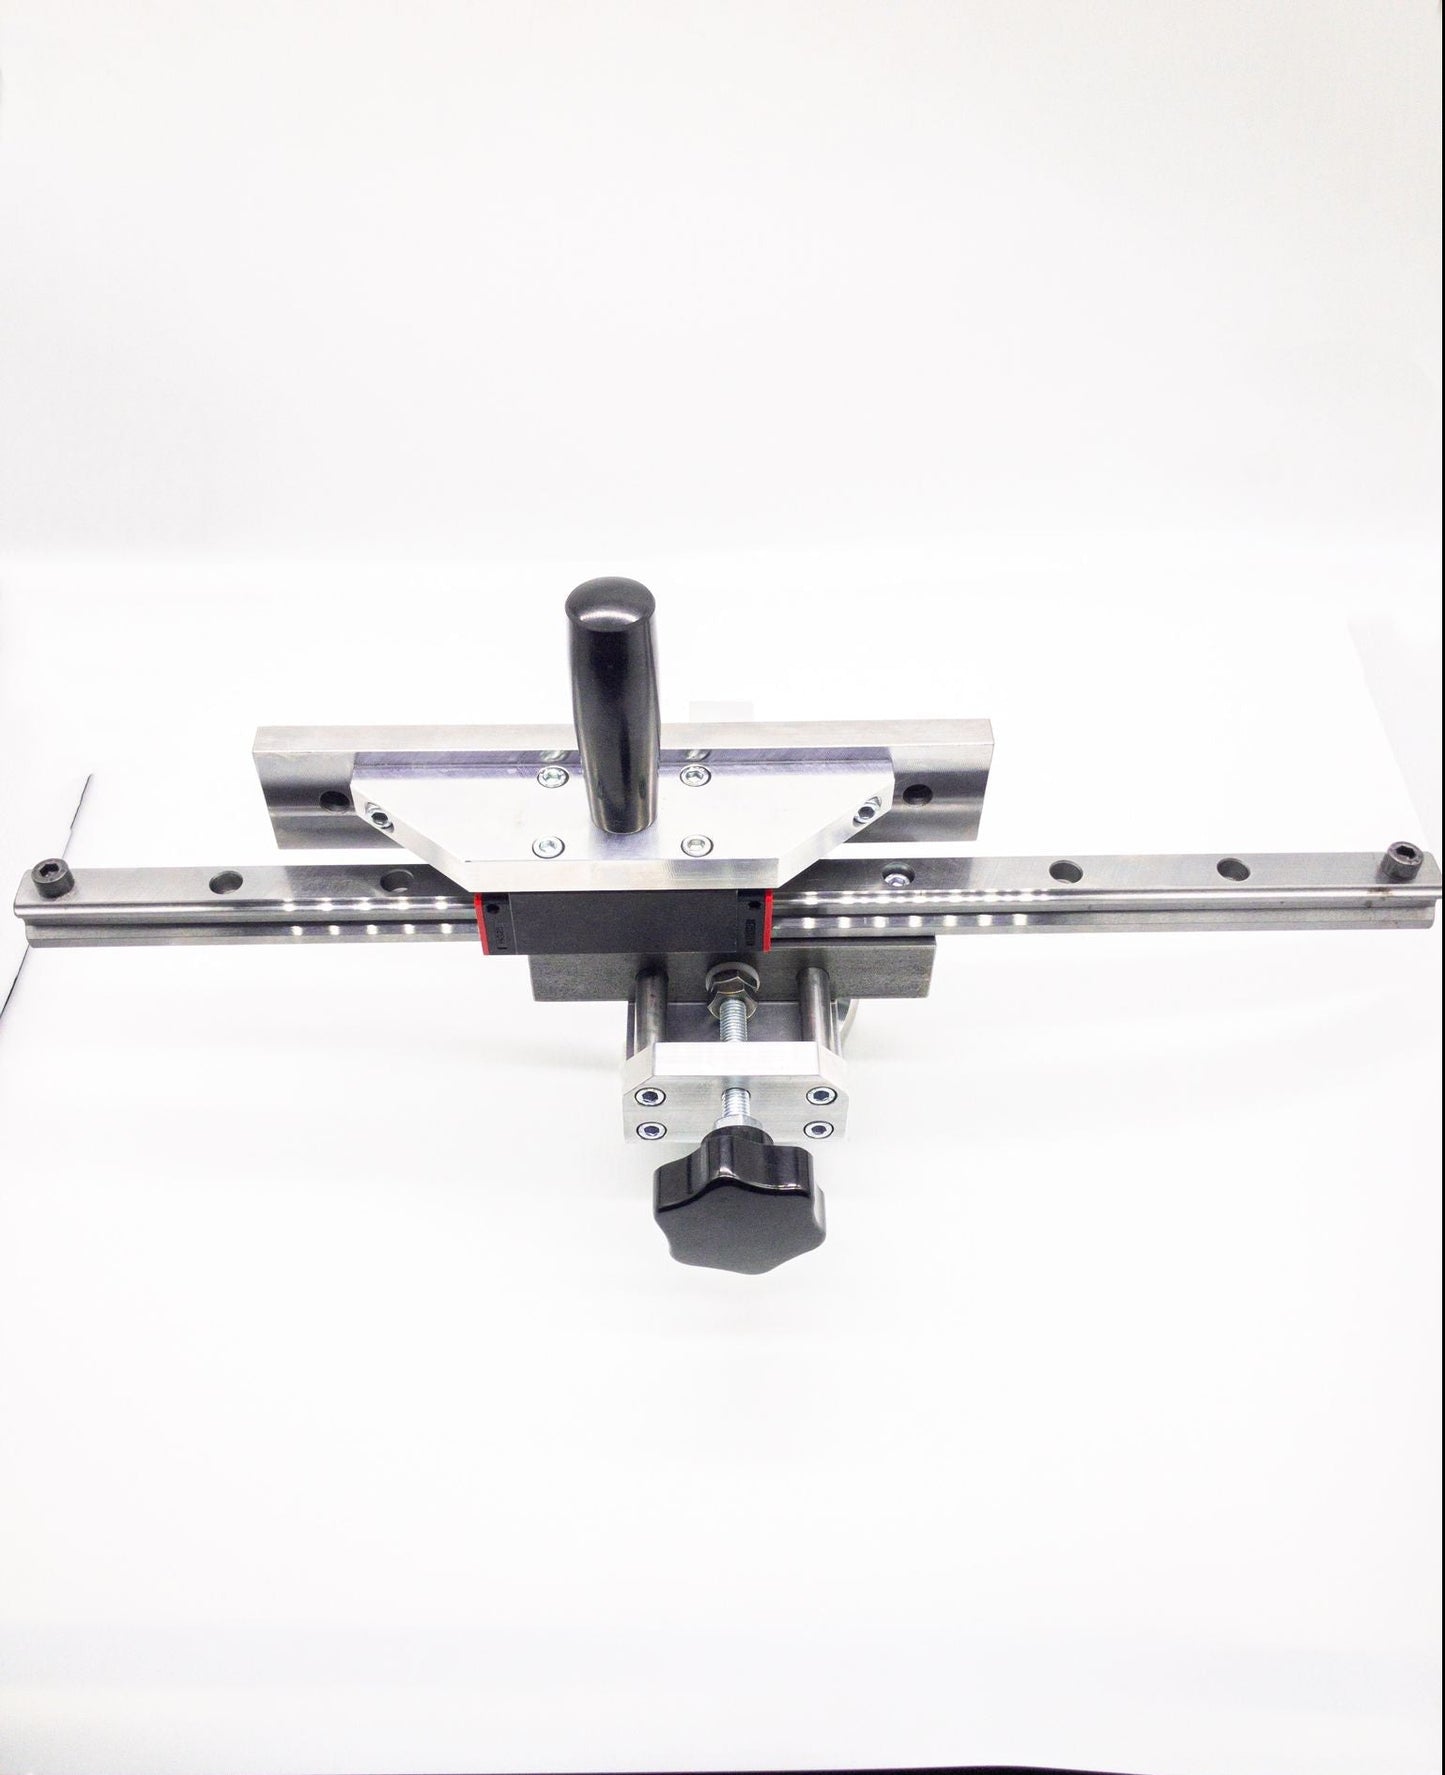 2X72 BELT GRINDER SURFACE SYSTEM KIT WIL WHEELS 180 mm PRE ORDER WILL BE SHIPPED DECEMBER 25